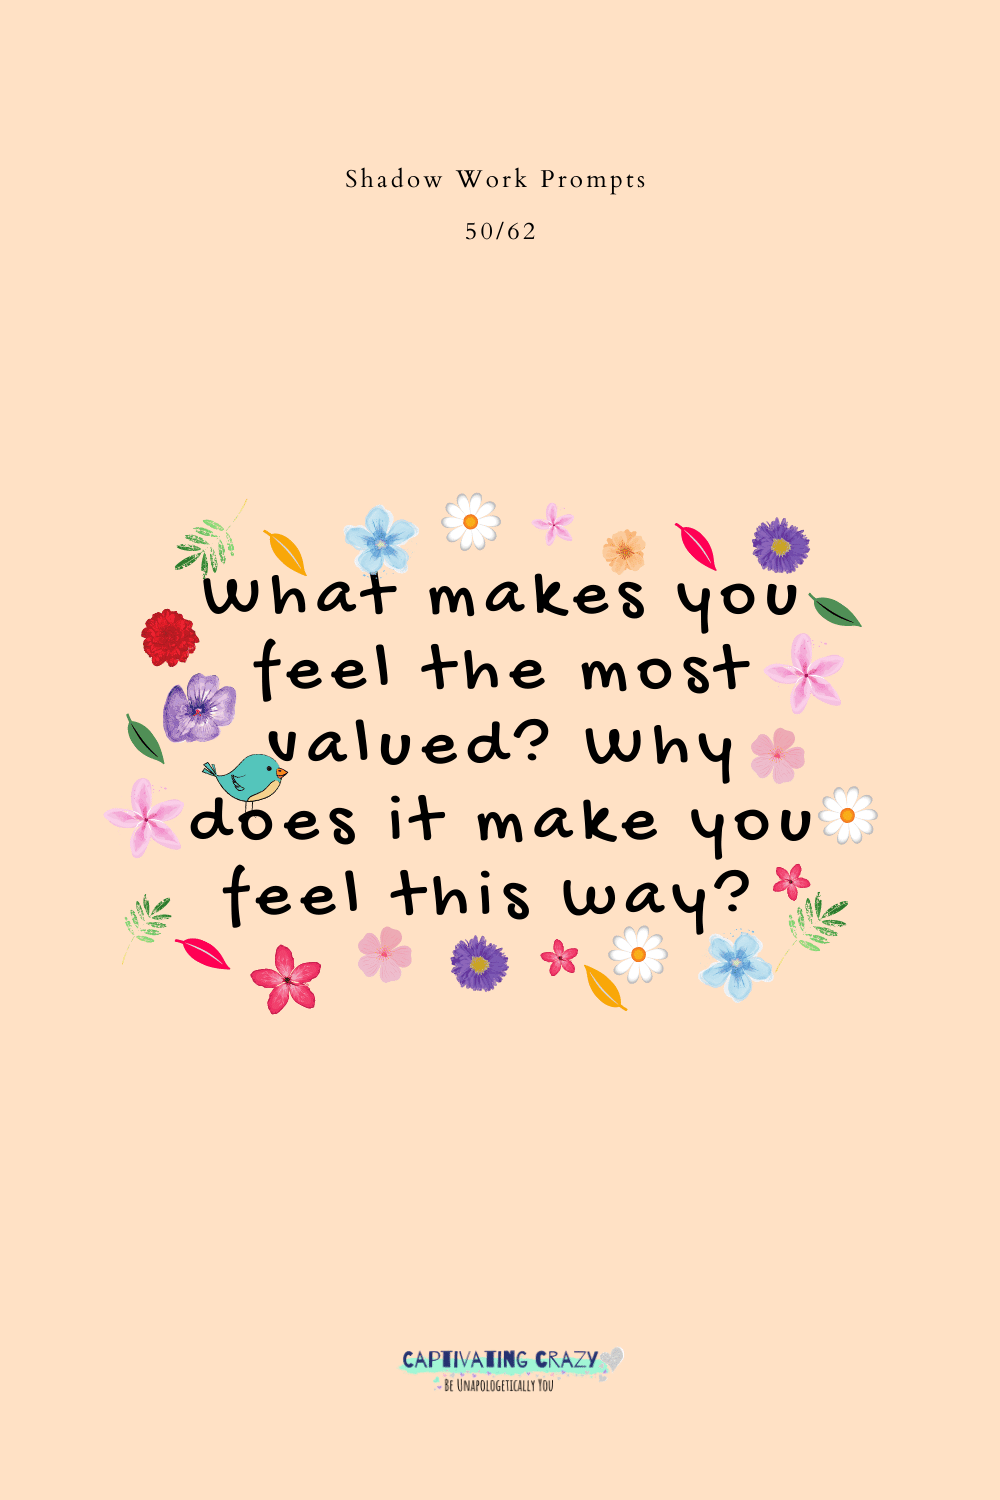 What makes you feel the most valued? Why does it make you feel this way? 